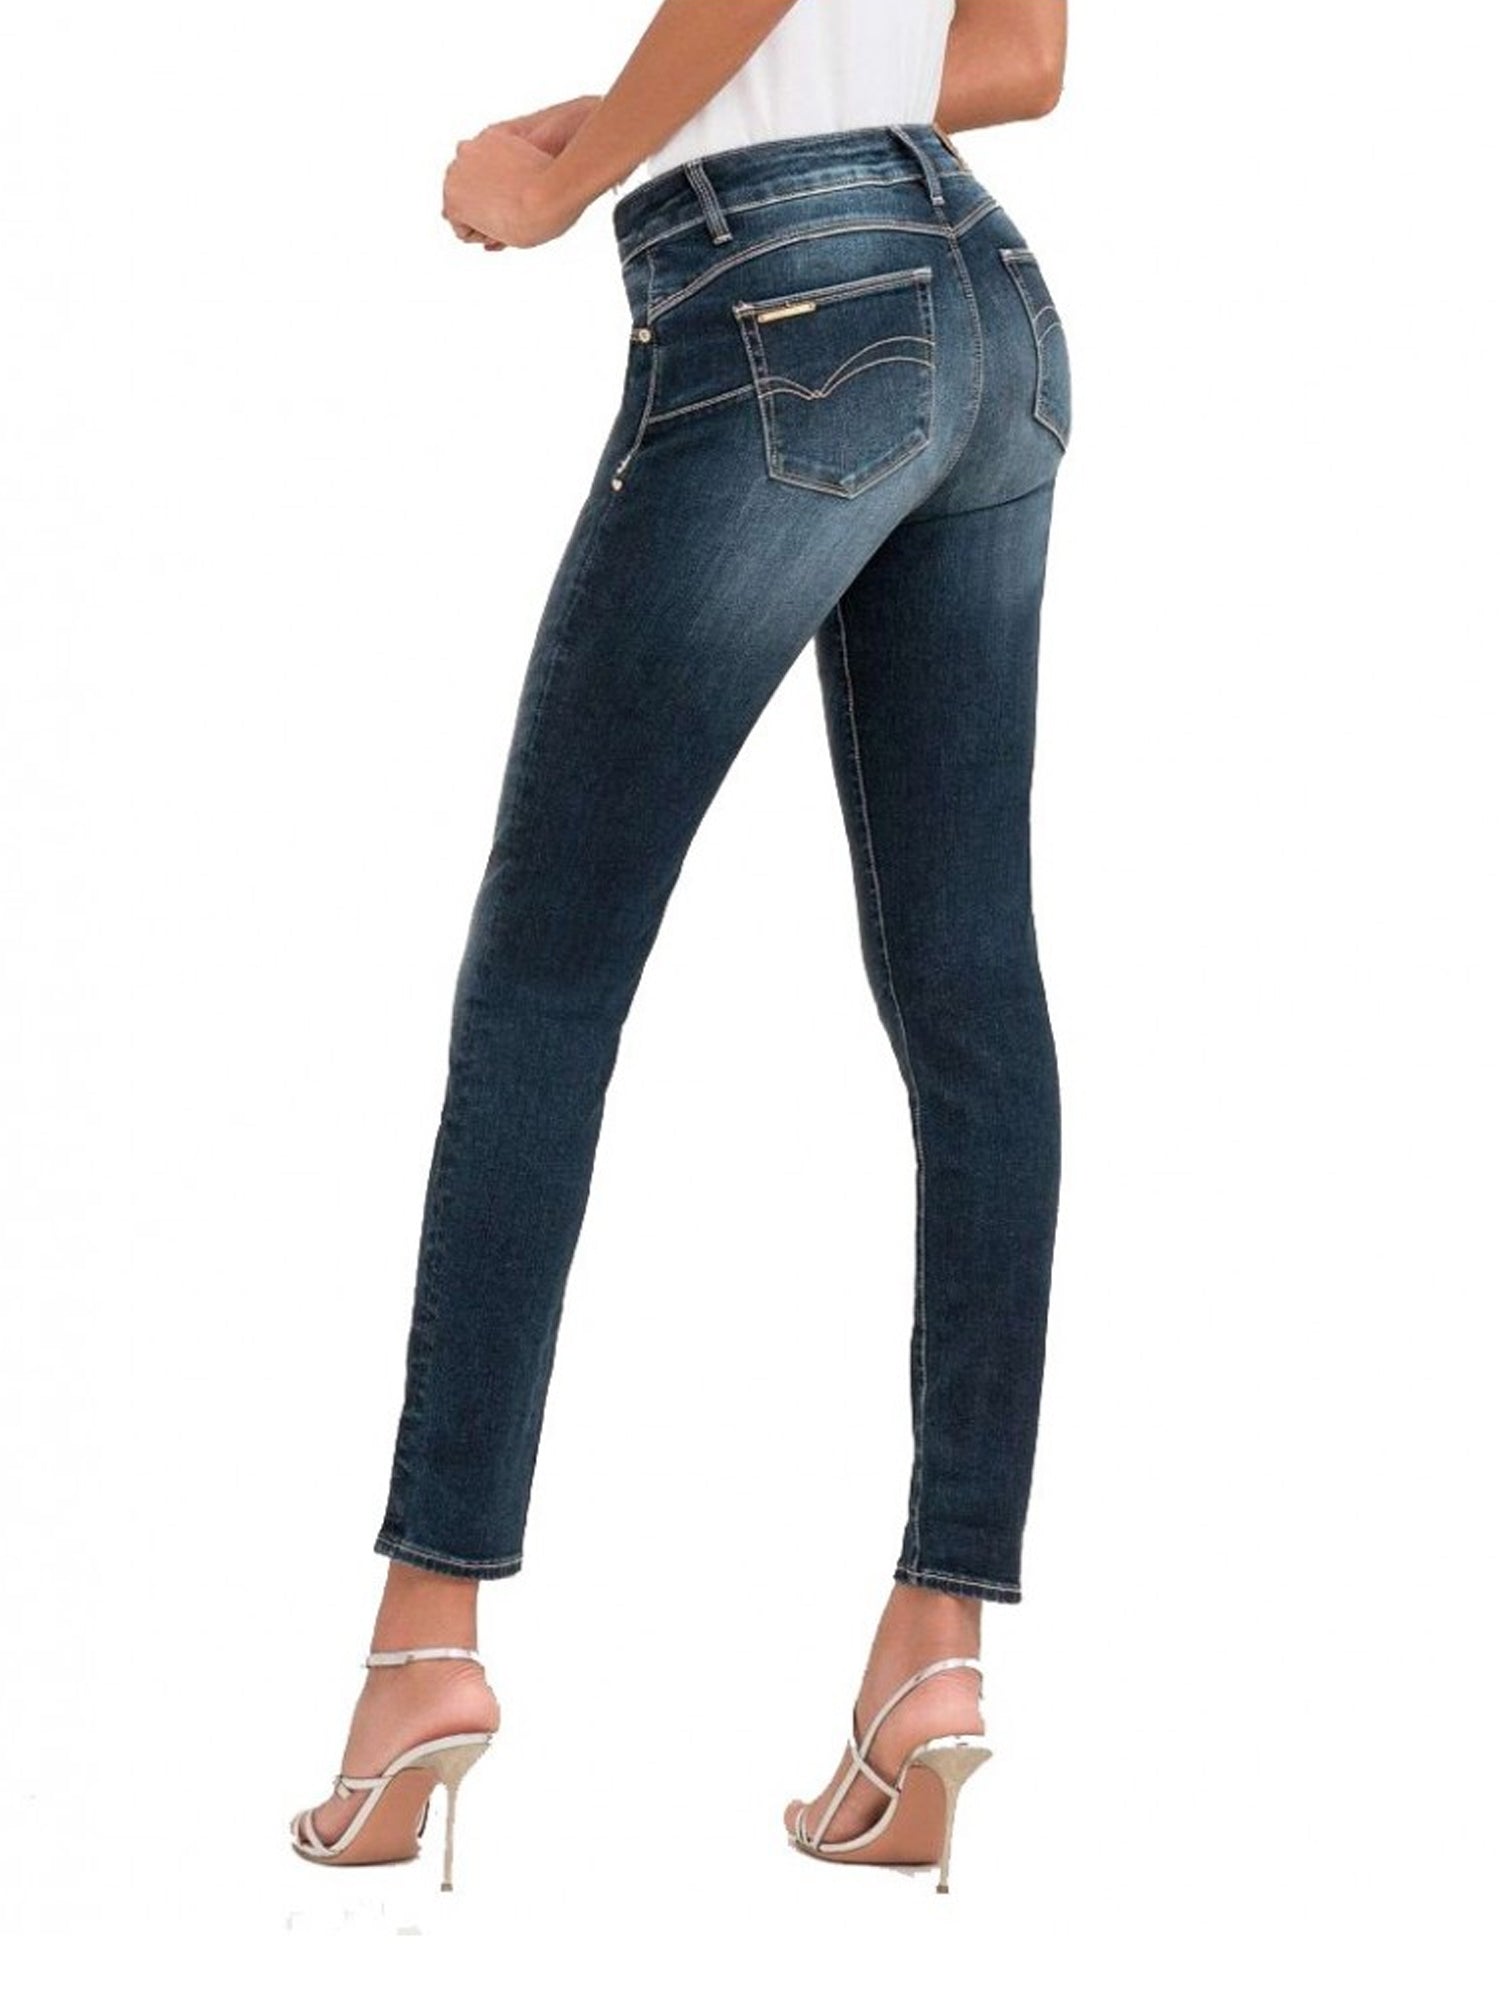 JEANS PERFECT SHAPE